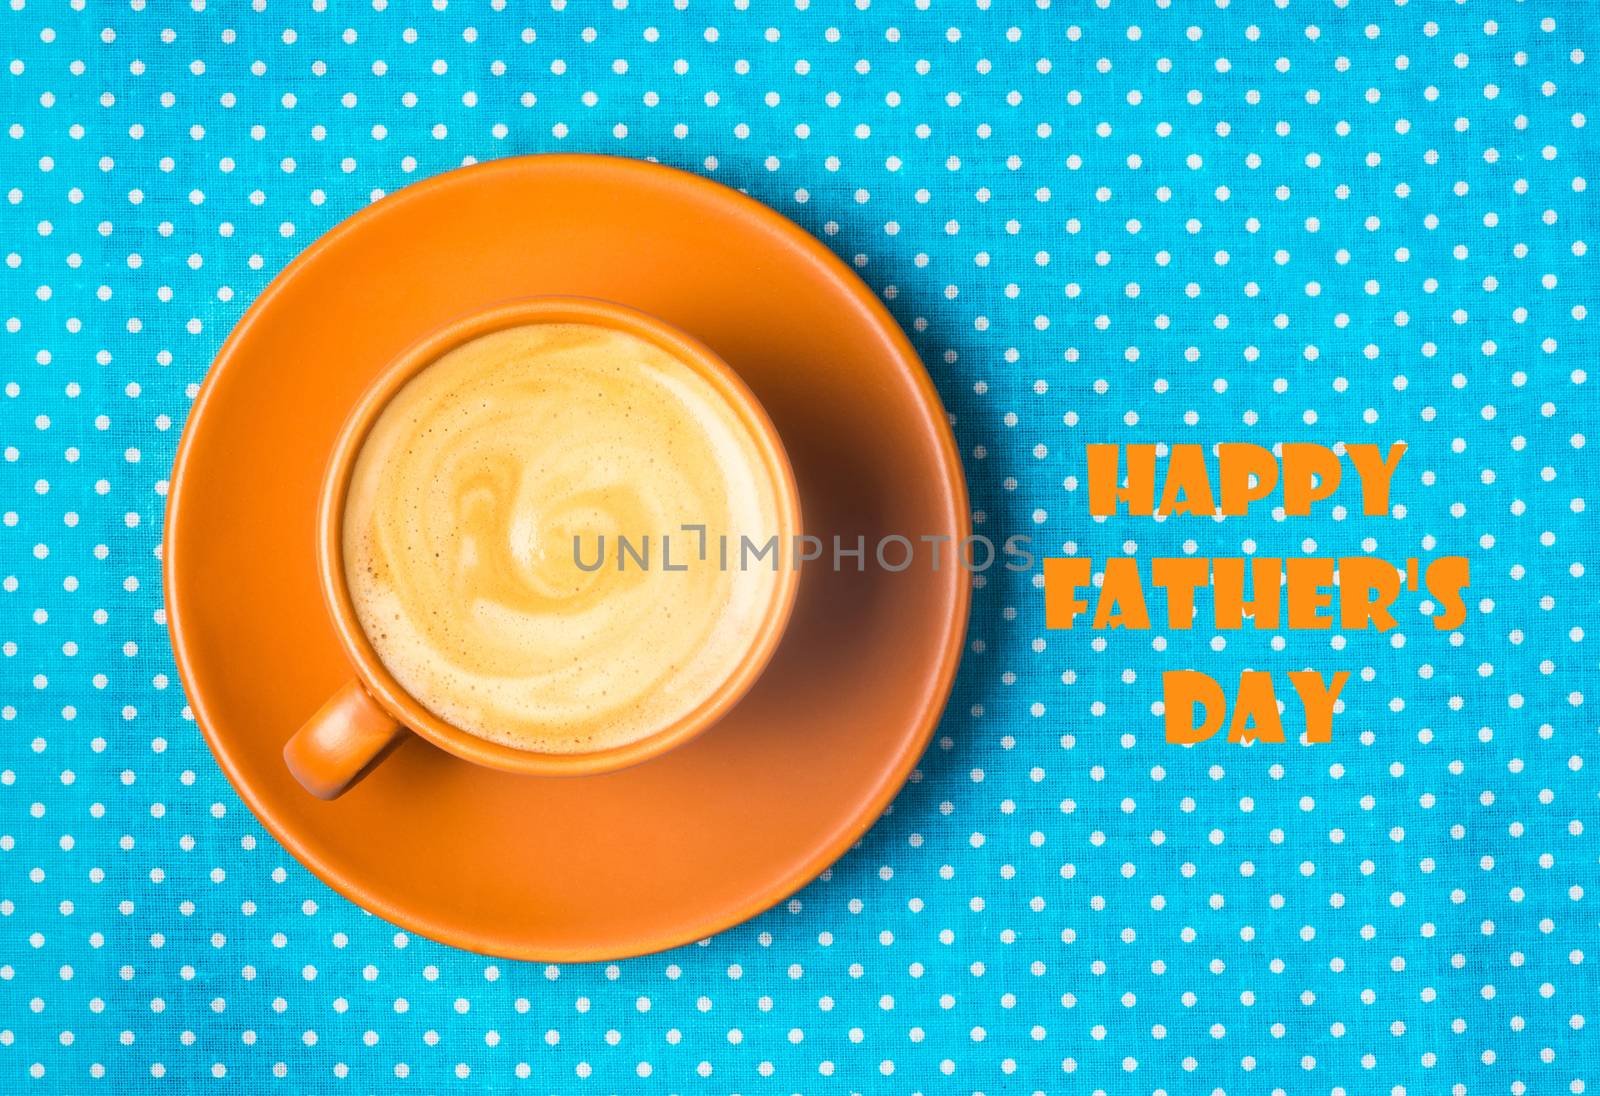 Greeting card with text happy father's day and ceramic cup with coffee espresso on a bright blue background, top view, greeting and love concept,  congratulations